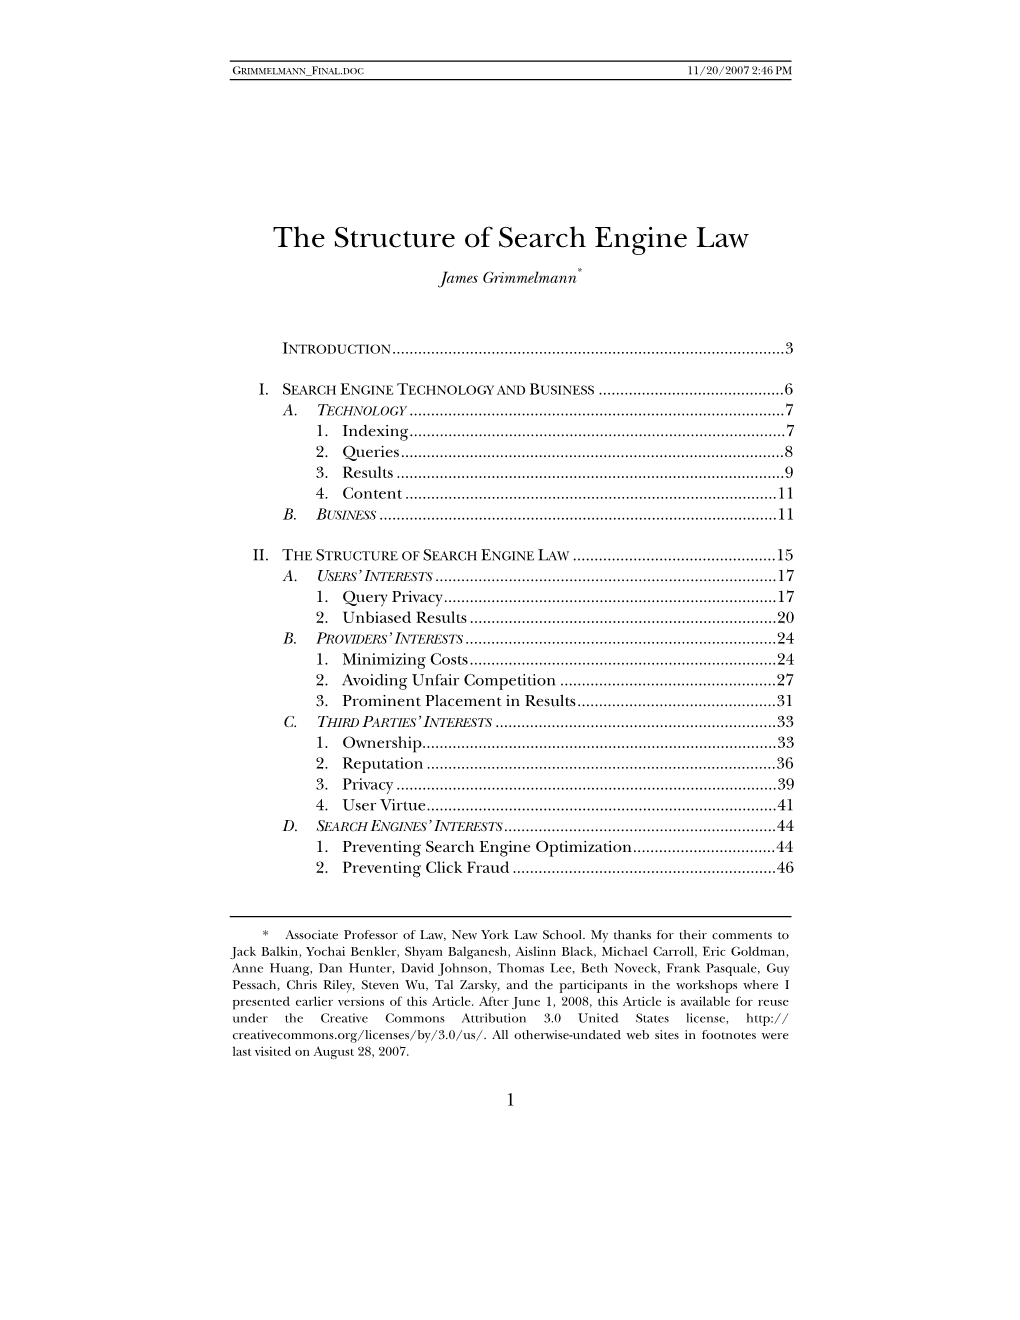 The Structure of Search Engine Law James Grimmelmann*